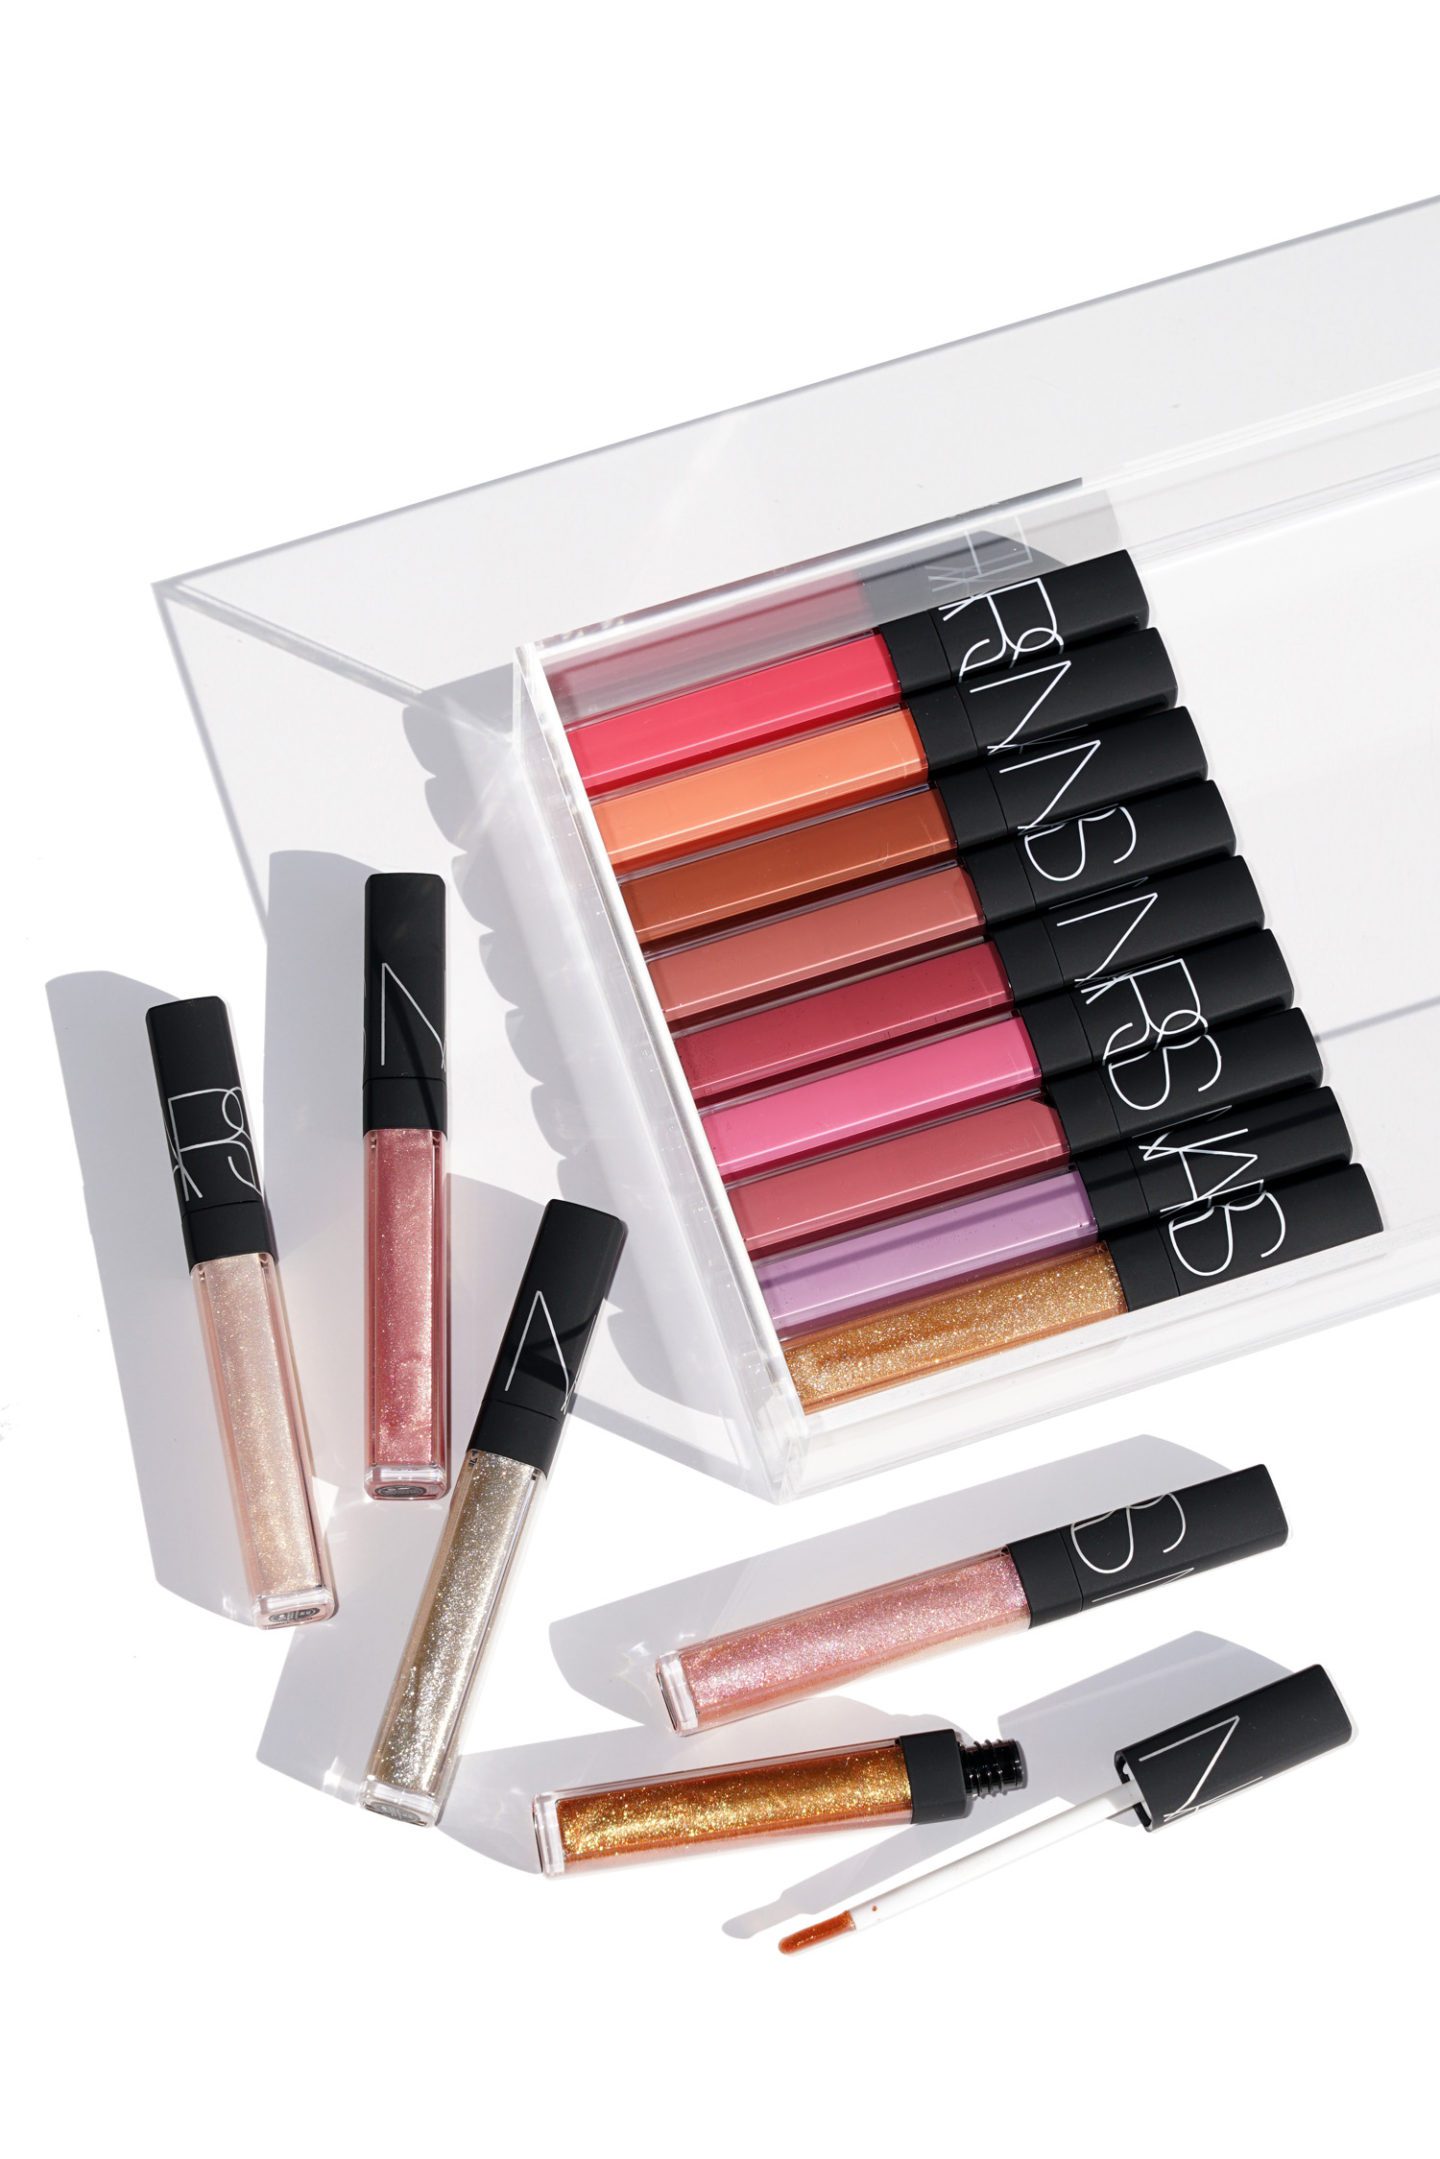 NARS Lip Gloss Shade Extensions and Multi-Use Gloss | The Beauty Look Book